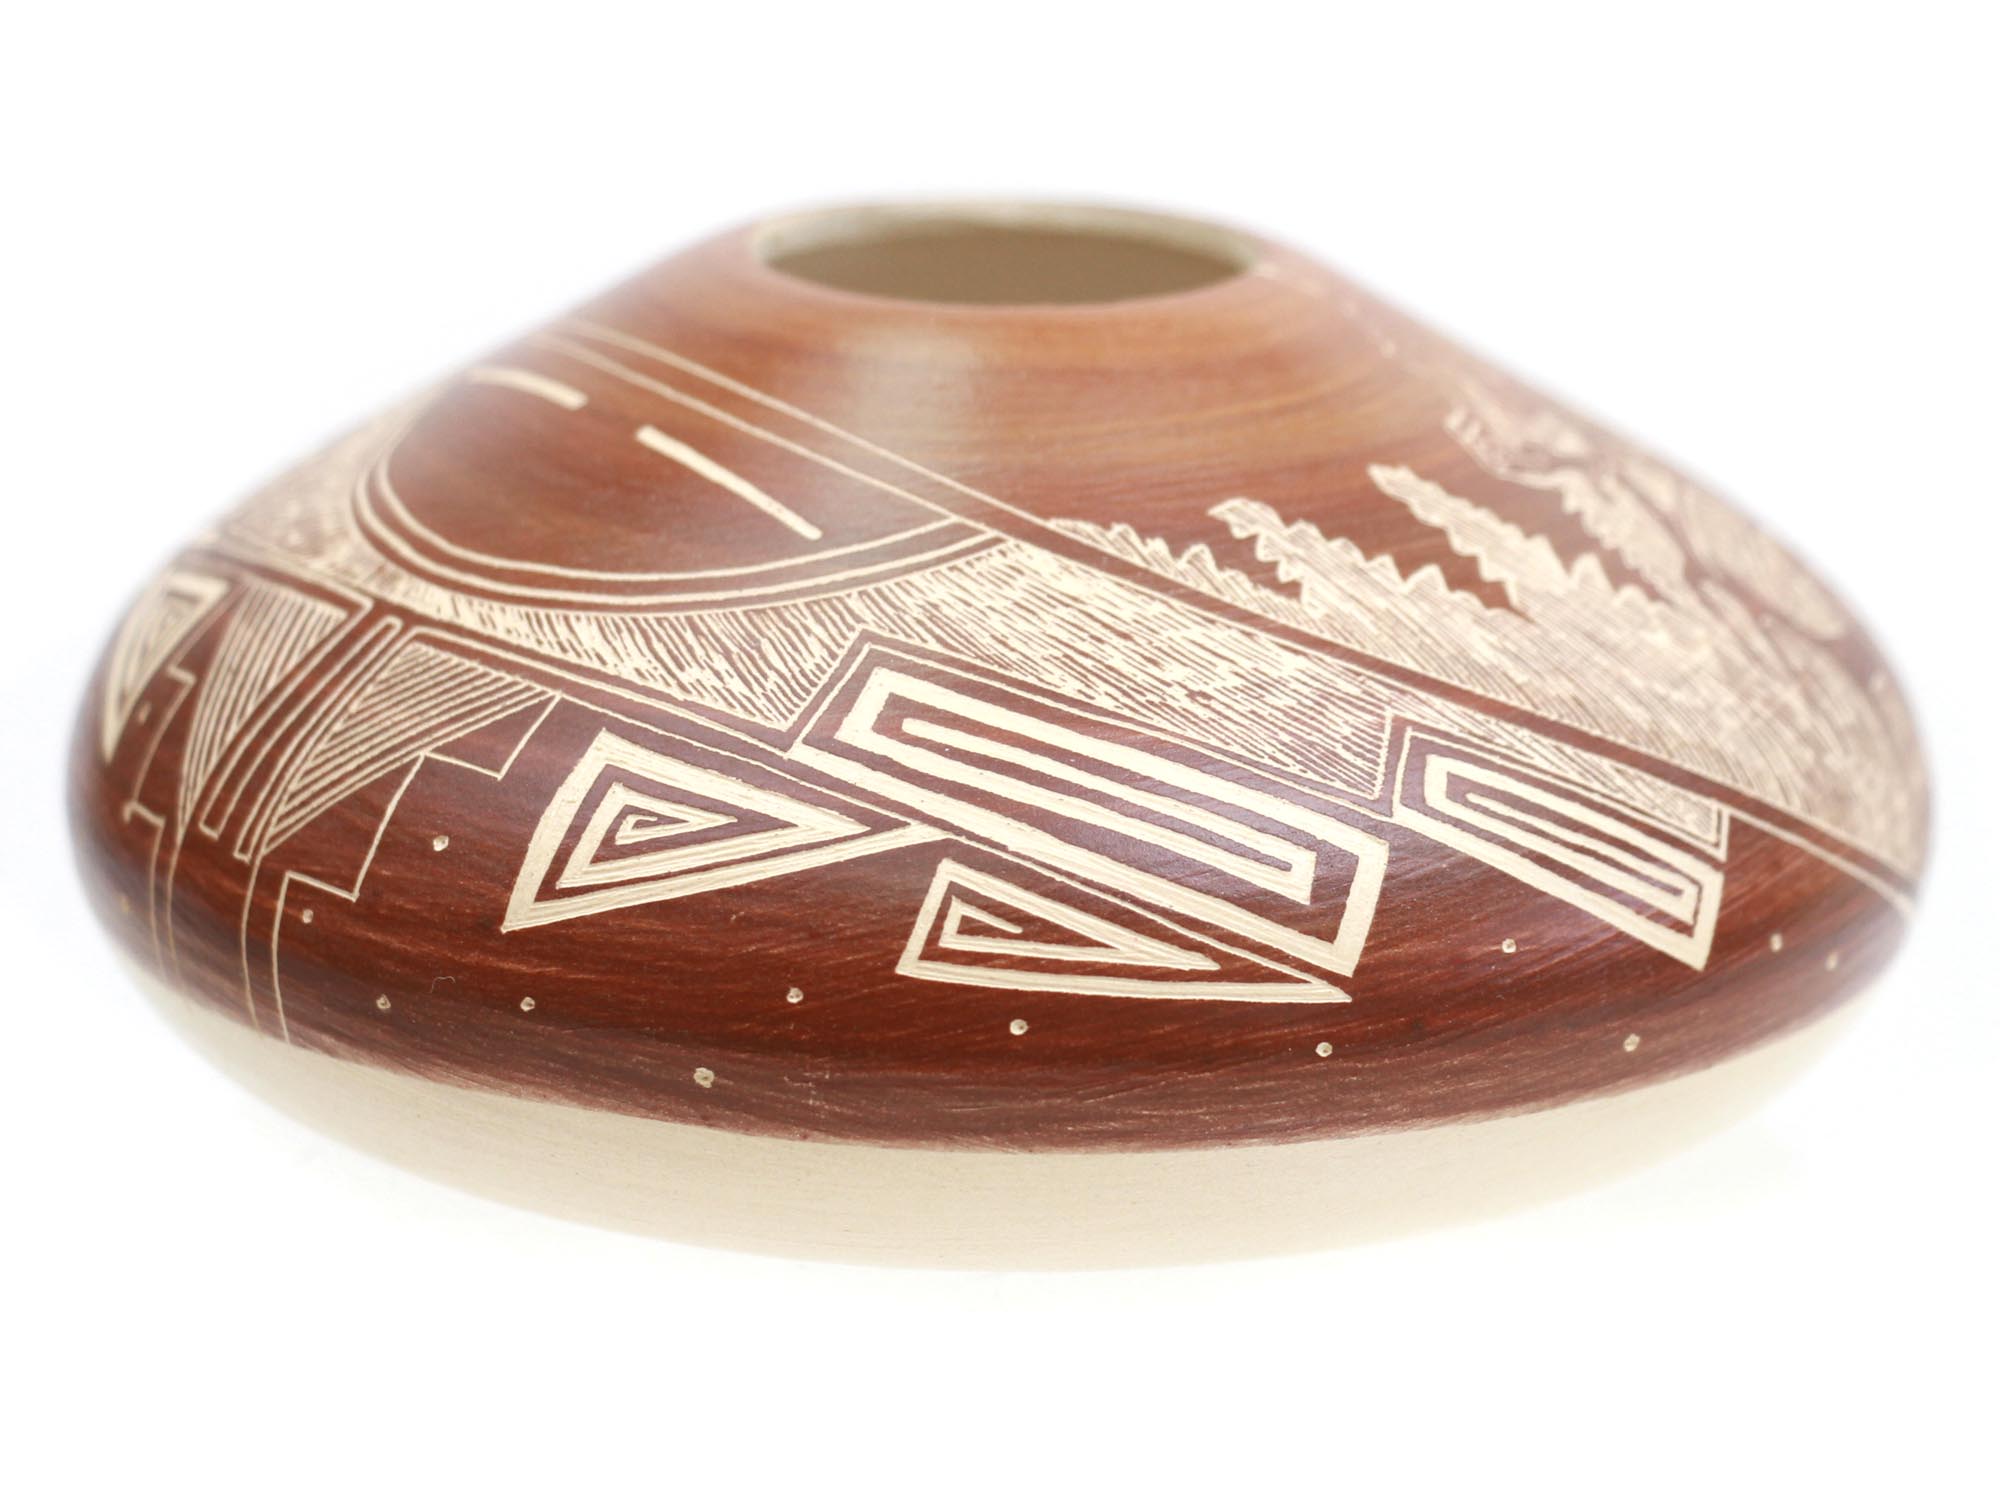 NAVAJO COLLECTION POTTERY VASE BY NORMAN LANSING PIC-2